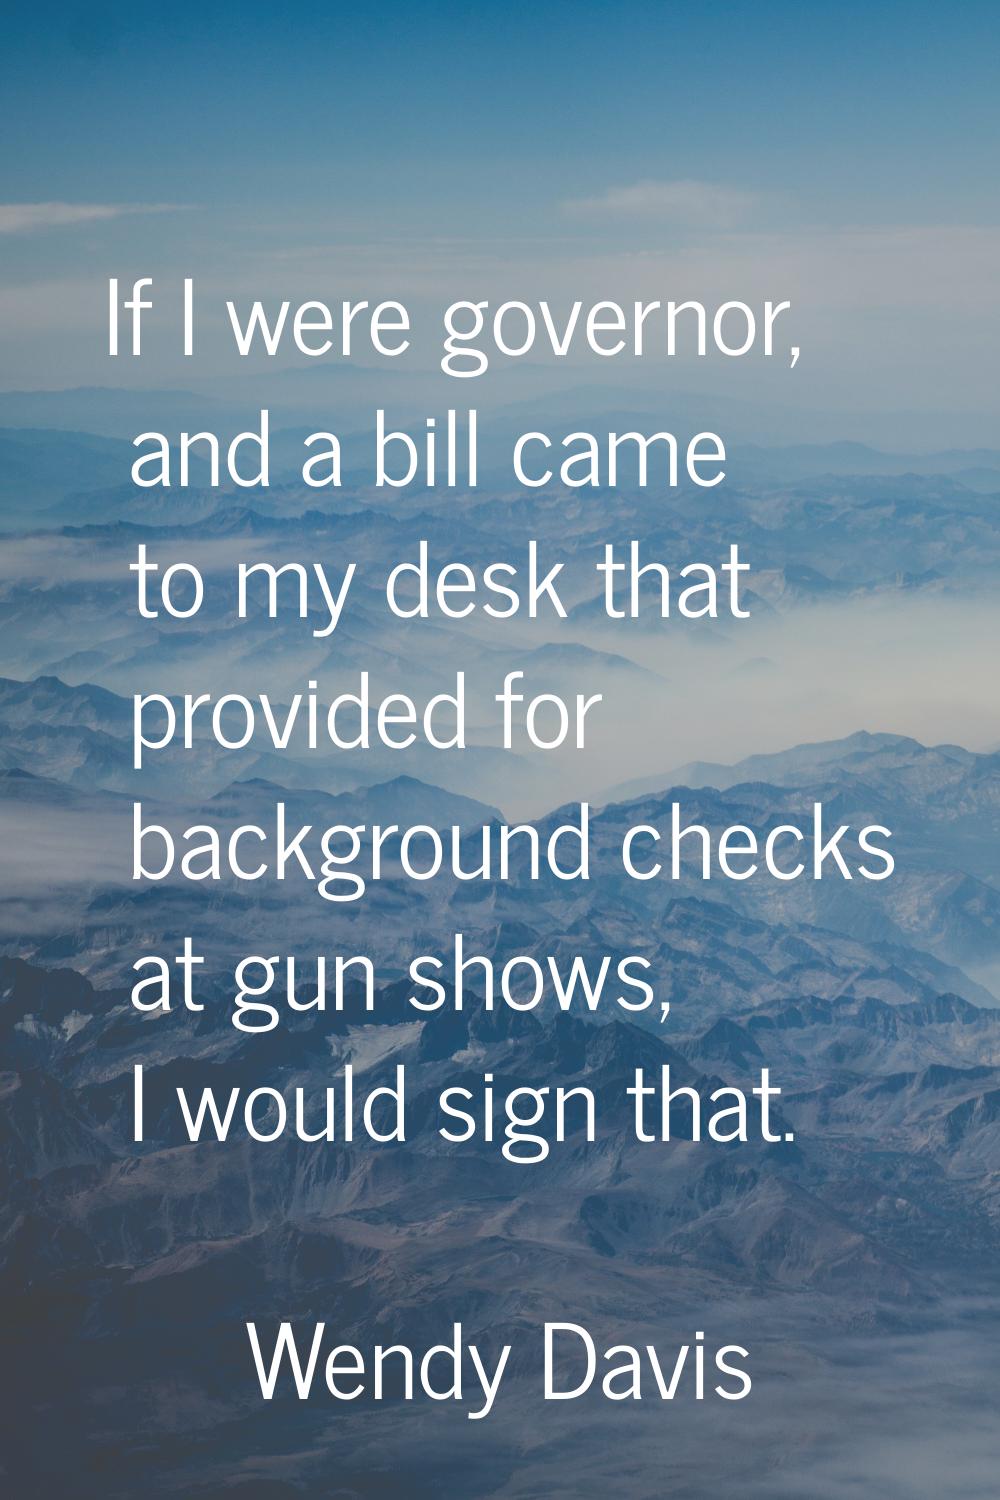 If I were governor, and a bill came to my desk that provided for background checks at gun shows, I 